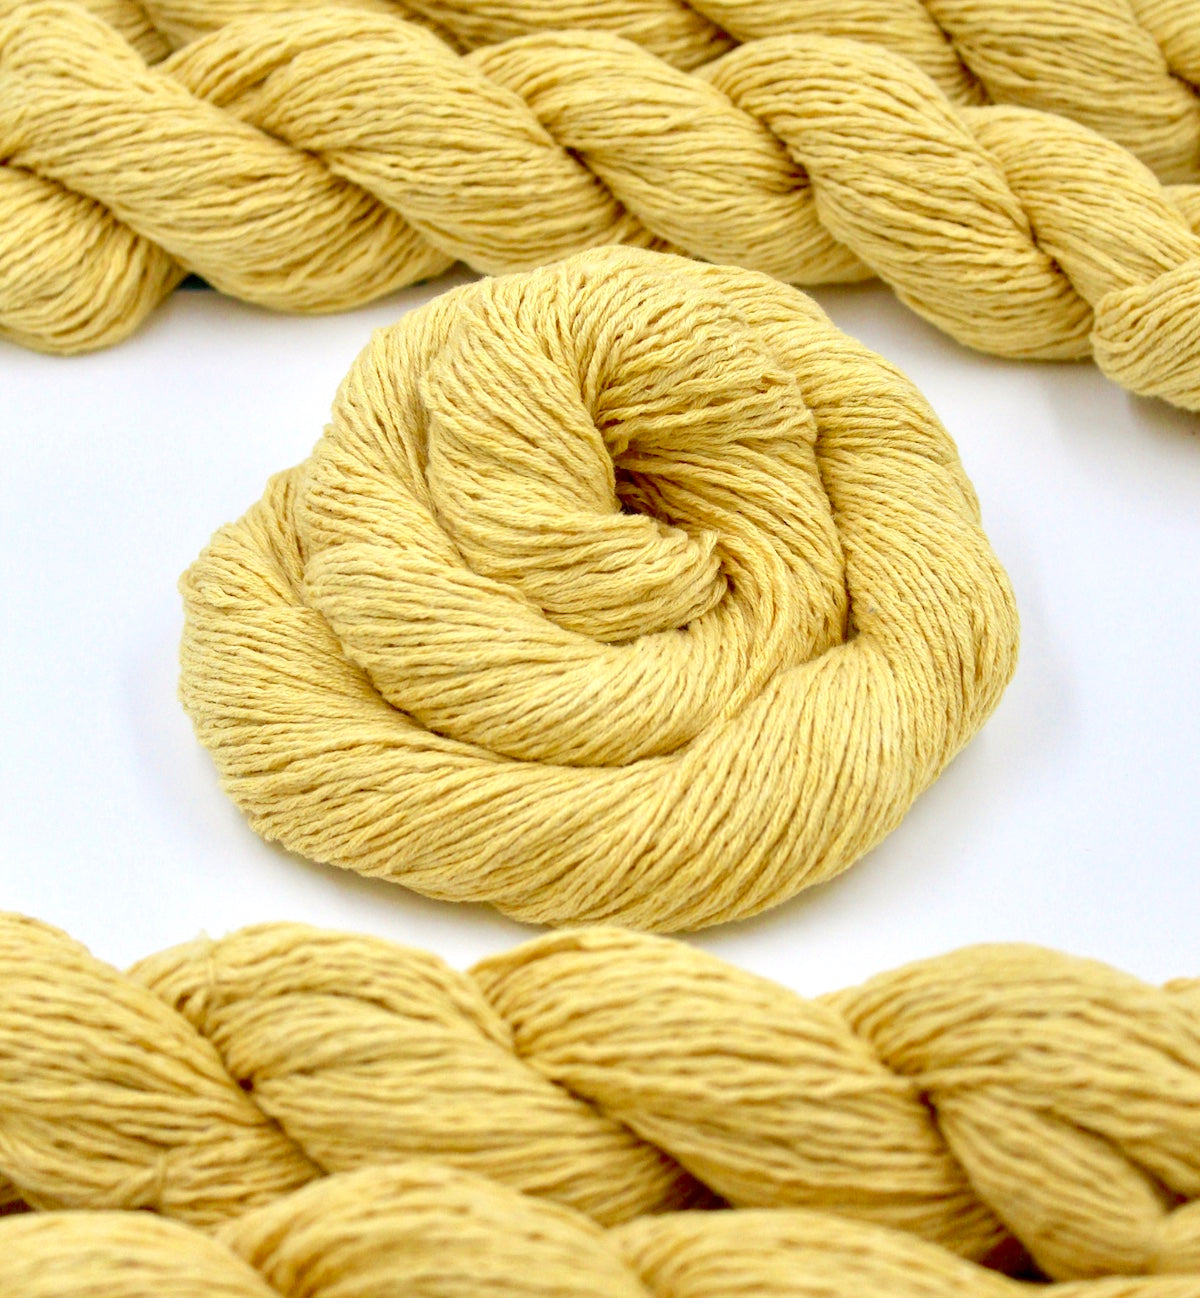 Several skeins of Golden Yellow, 100% Cotton, Sport weight recycled by hand from unwanted sweaters stacked on top of each other attractively. 